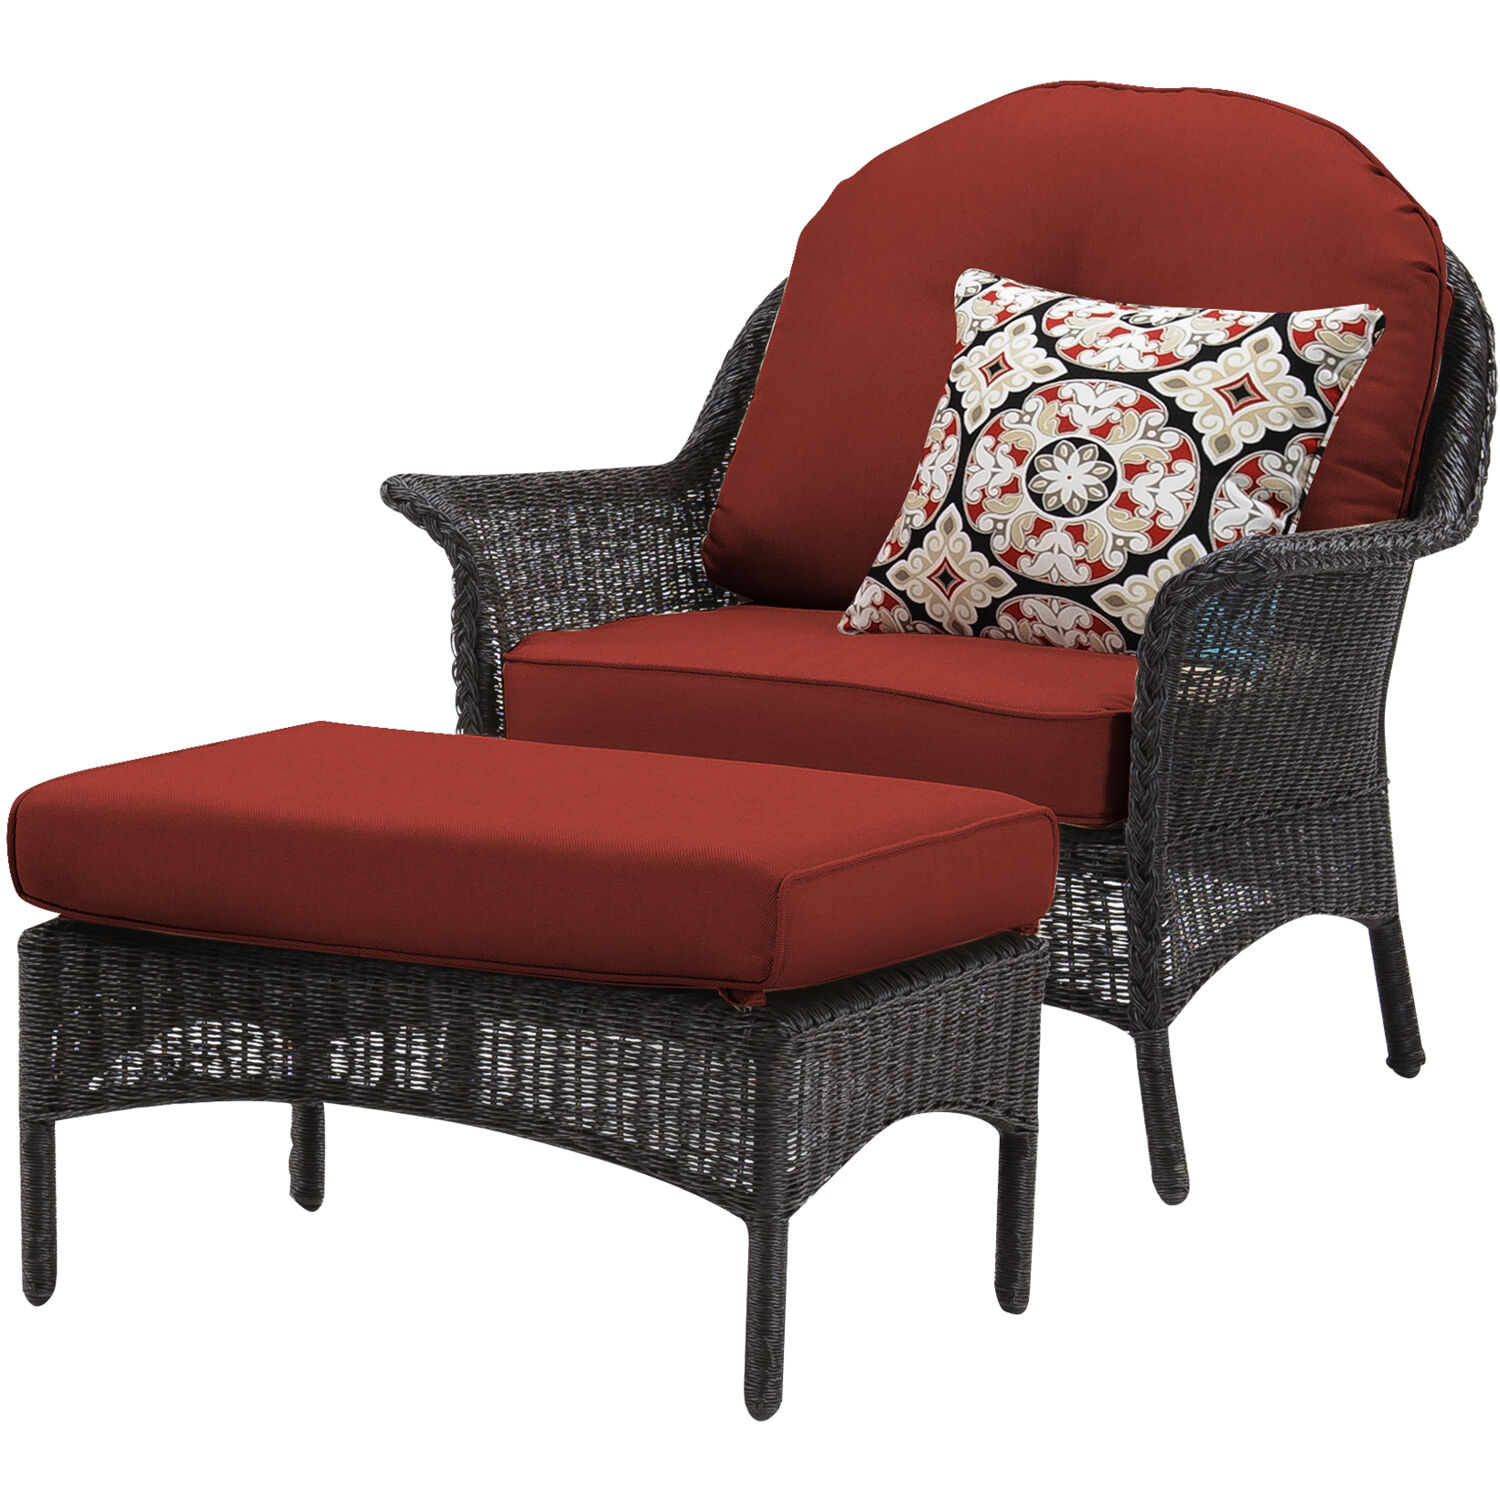 Hanover Sun Porch 6-Pc. Resin Lounge Set w/ Handwoven Loveseat, 2 Armchairs, 2 Ottomans, Coffee Table and Plush Crimson Red Cushions - image 3 of 12